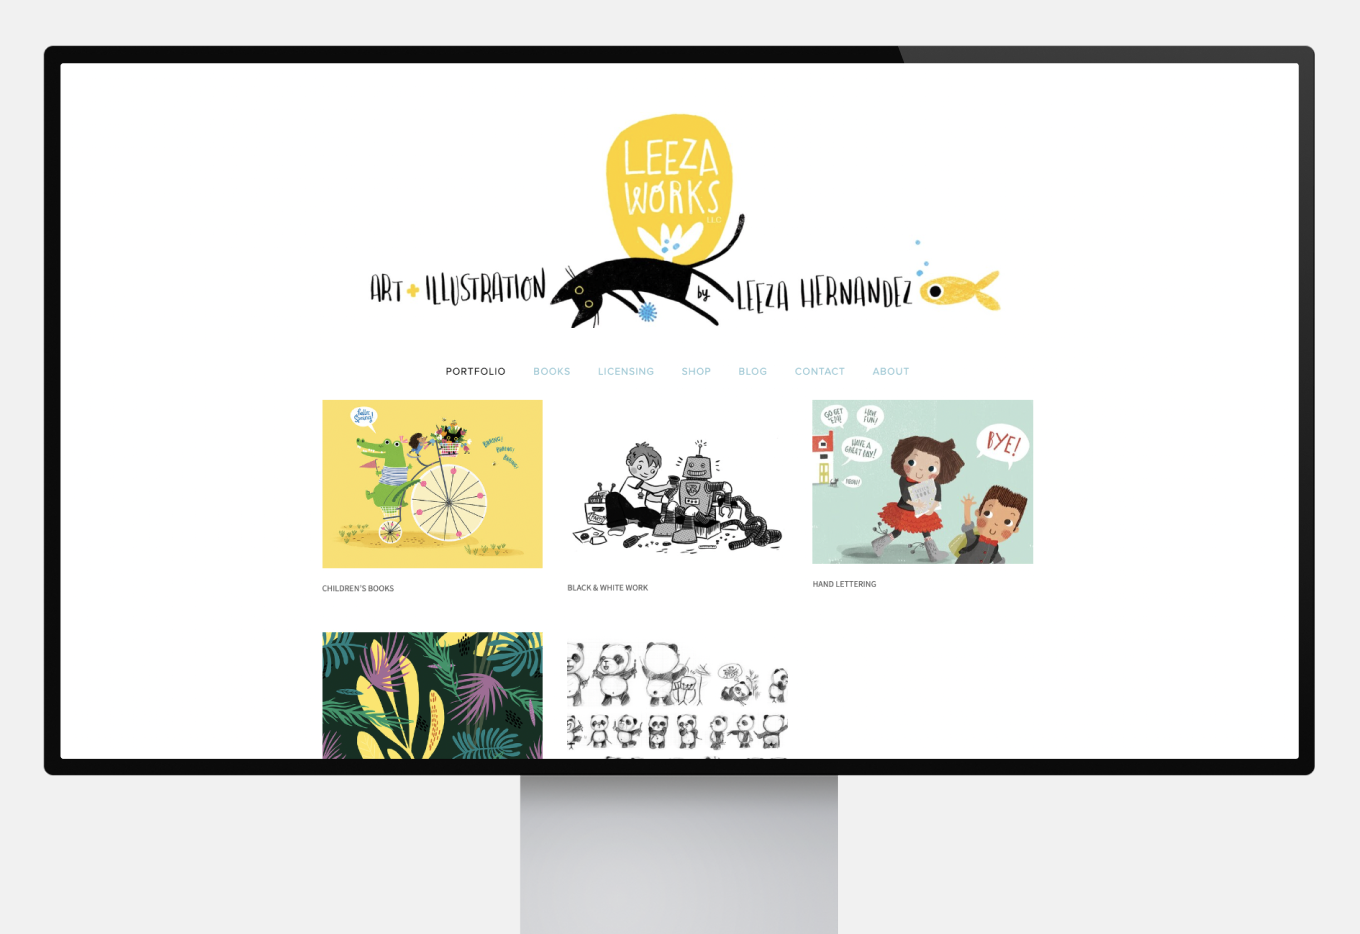 A white portfolio with a yellow logo and a drawing of a black cat. Children's books illustrations are displayed in a grid.